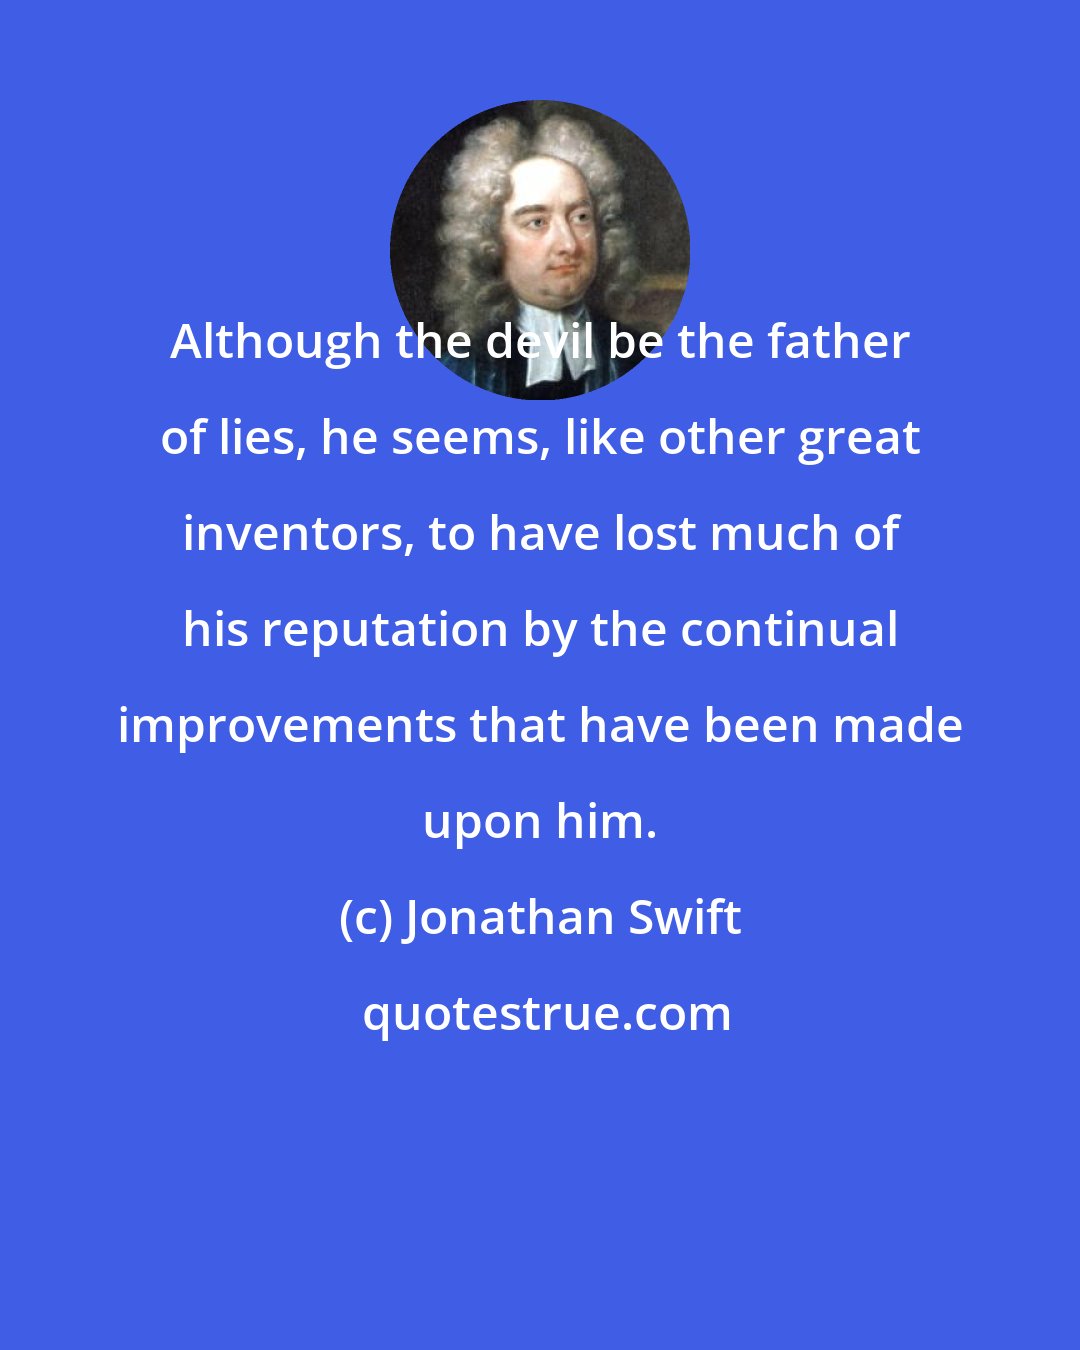 Jonathan Swift: Although the devil be the father of lies, he seems, like other great inventors, to have lost much of his reputation by the continual improvements that have been made upon him.